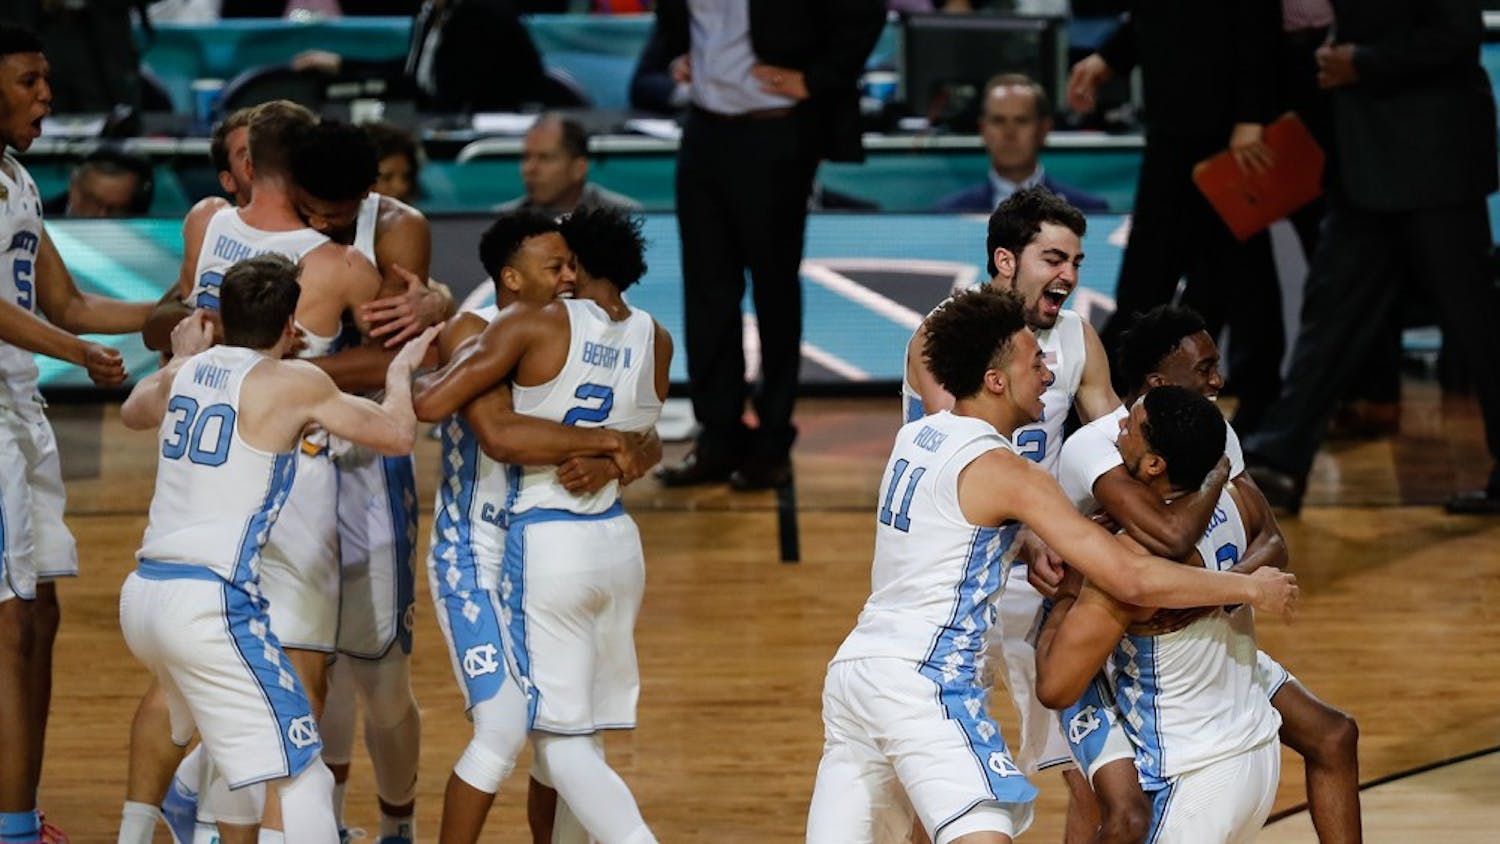 The North Carolina bench erupts into celebration after their win the NCAA Final game against Gonzaga in Phoenix on Monday.